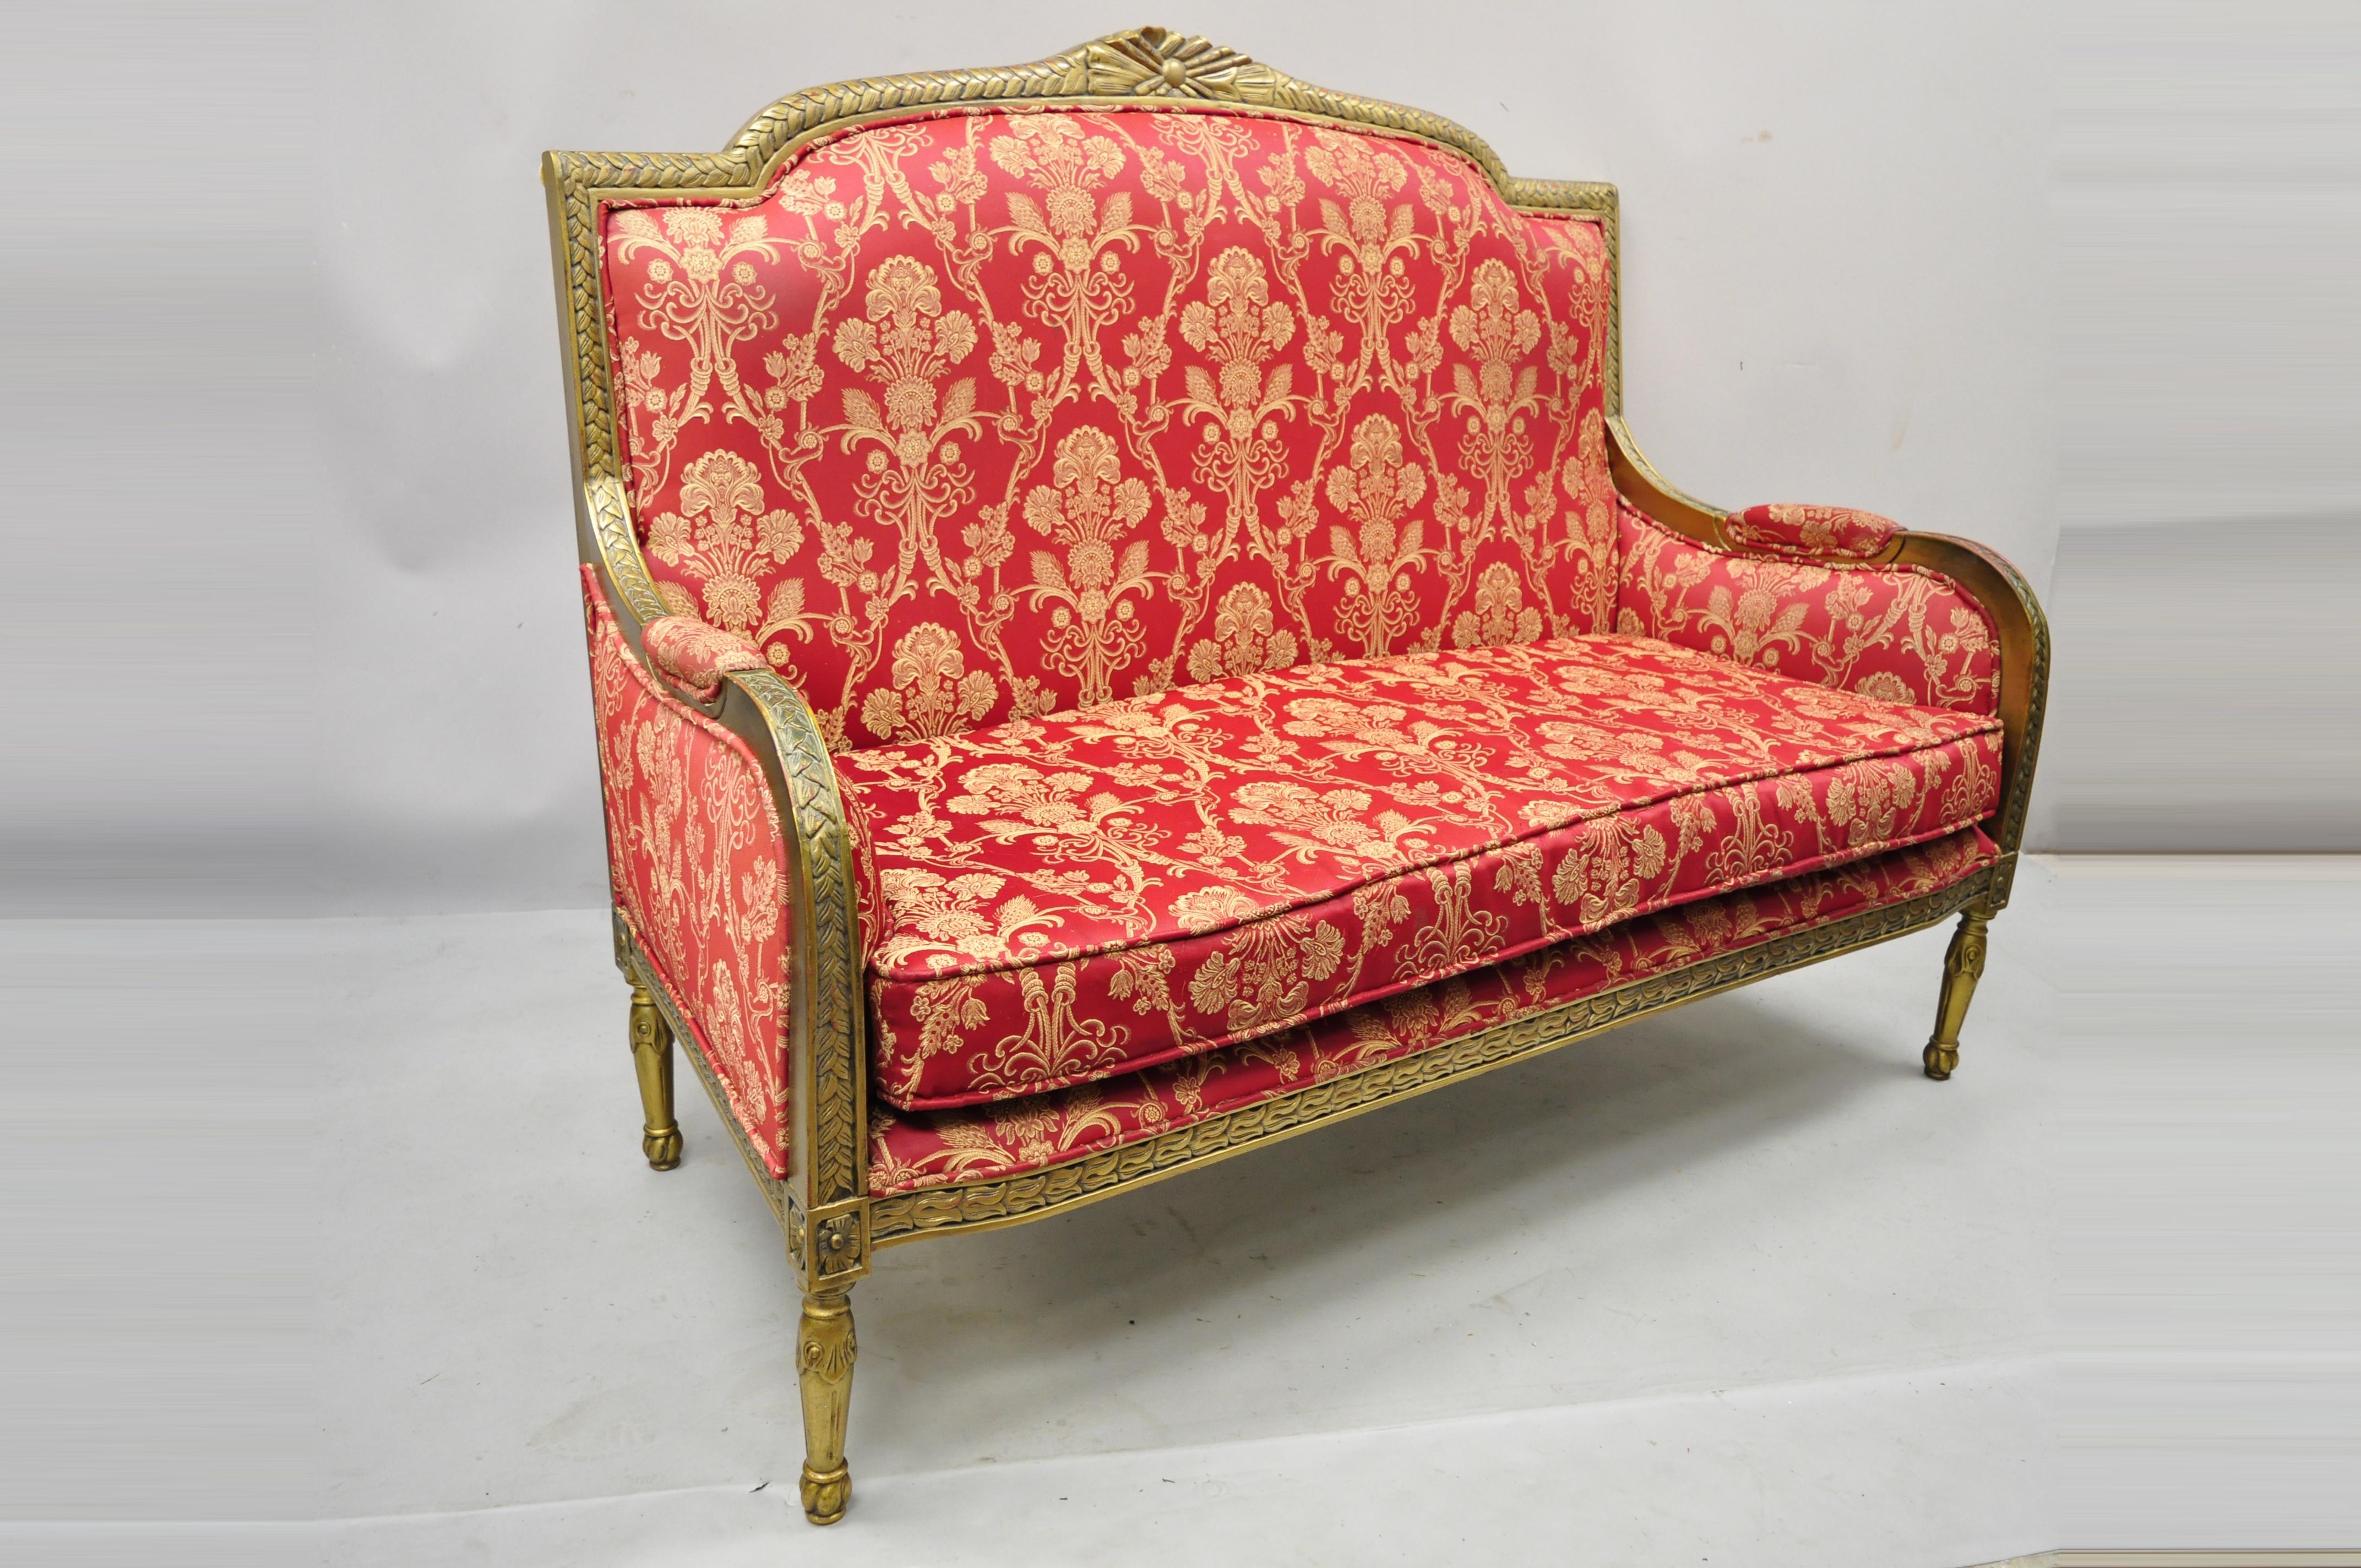 French Louis XVI style gold painted red upholstered settee sofa loveseat decorator chair. Item features solid wood frame, upholstered arm rests, gold distress painted finish, nicely carved details, tapered legs, great style and form. Circa late 20th